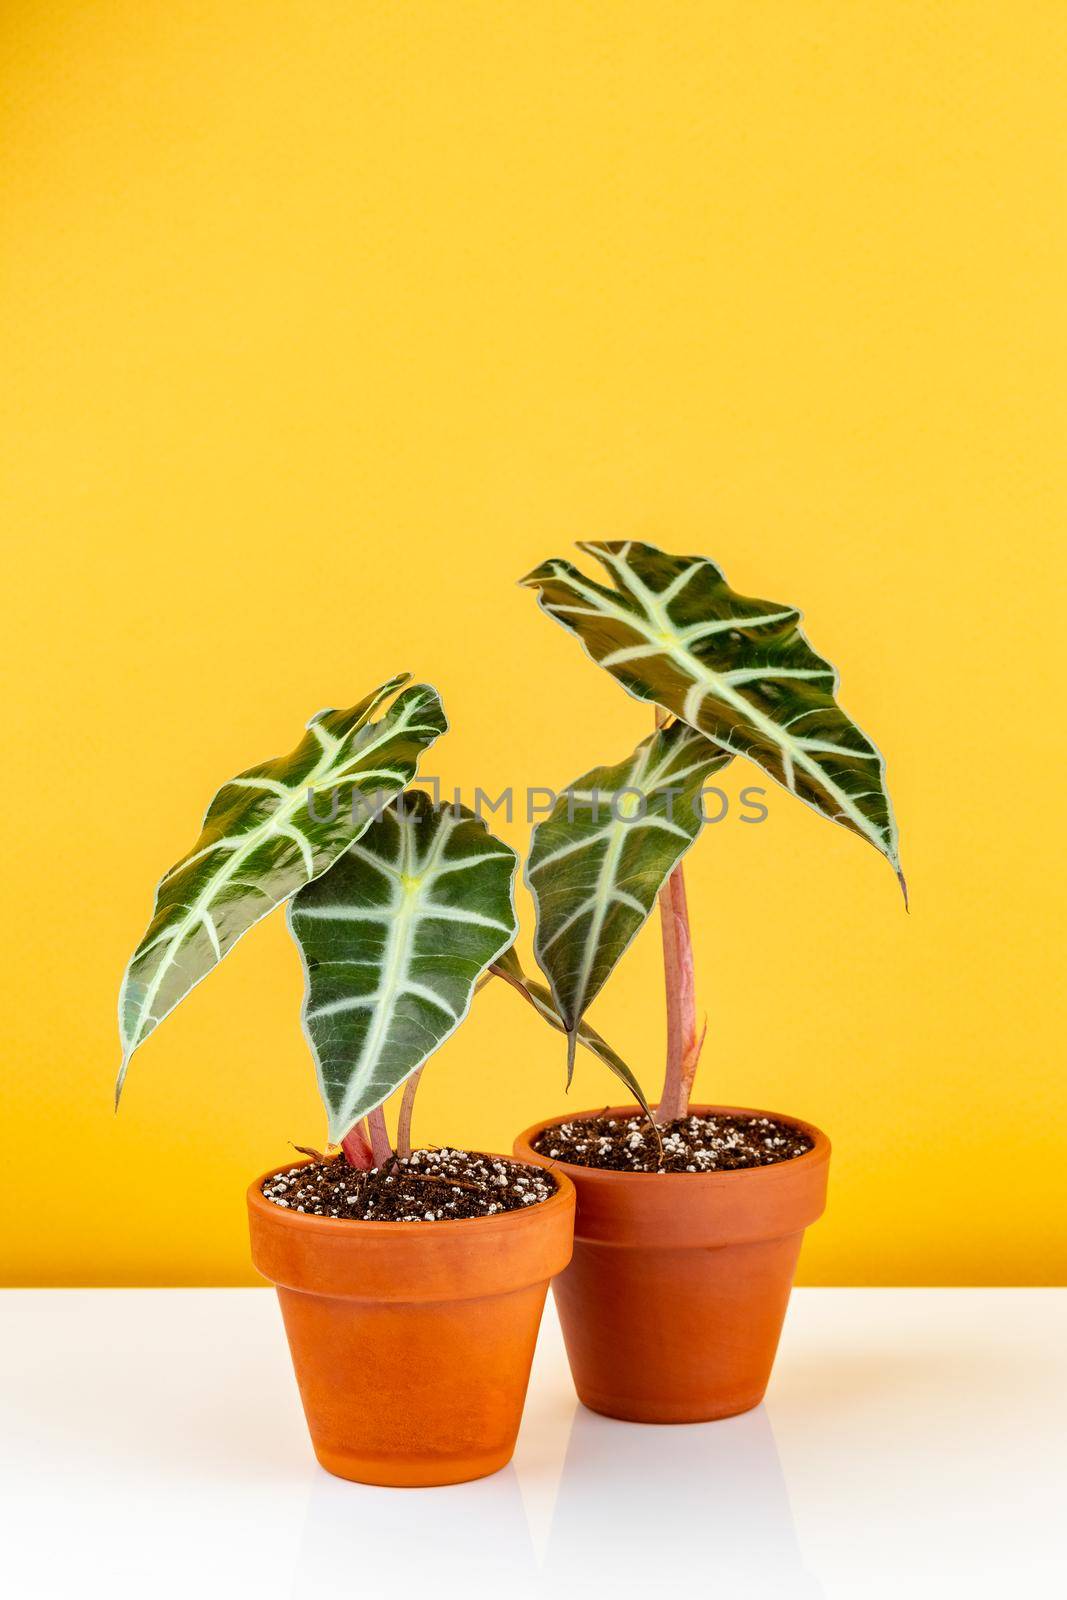 Alocasia Polly potted in terracota ceramic planter by Syvanych